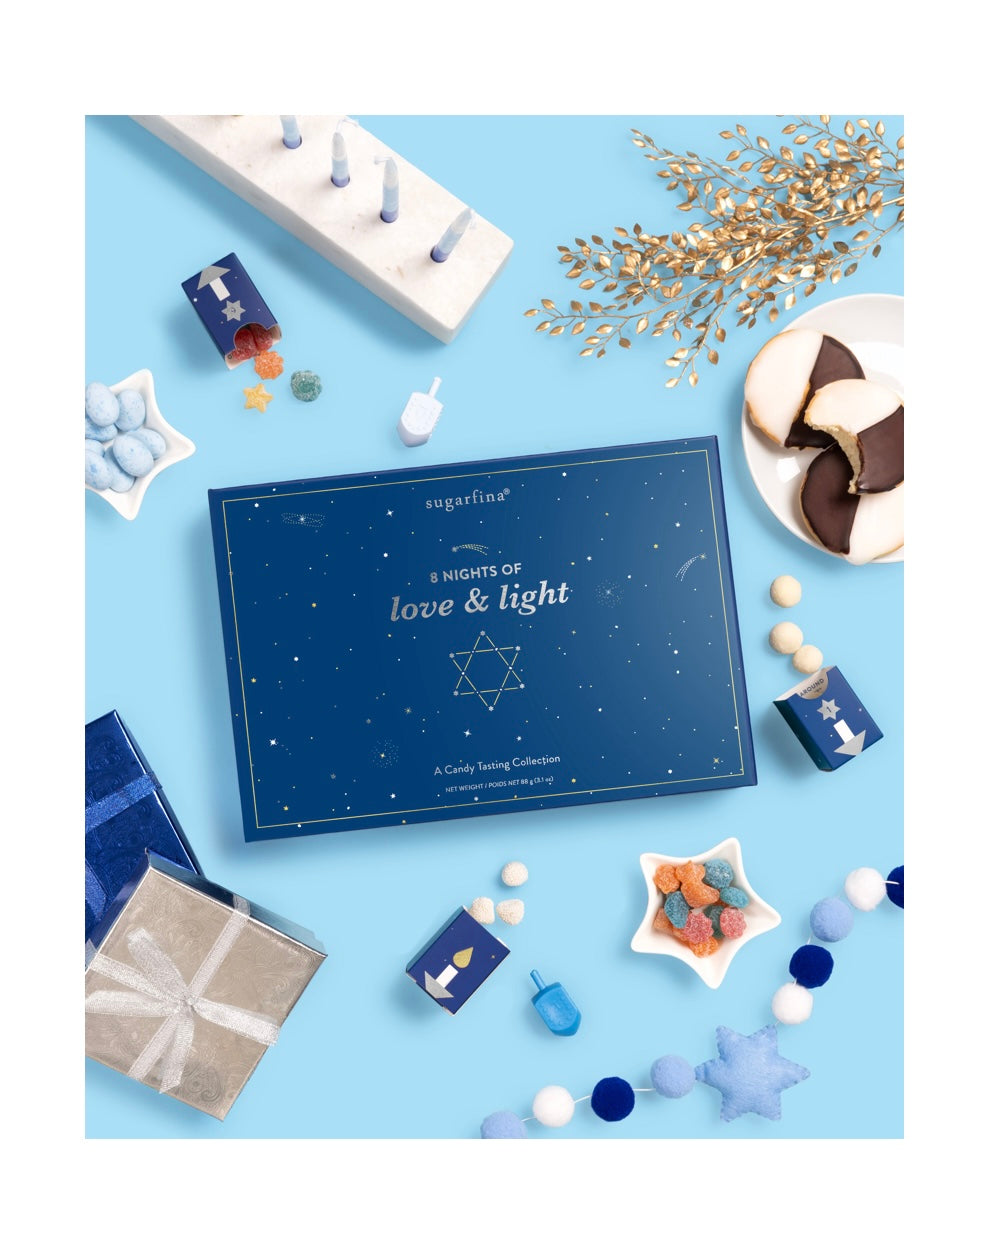 HANUKKAH 8 NIGHTS OF LOVE AND LIGHT CANDY TASTING COLLECTION